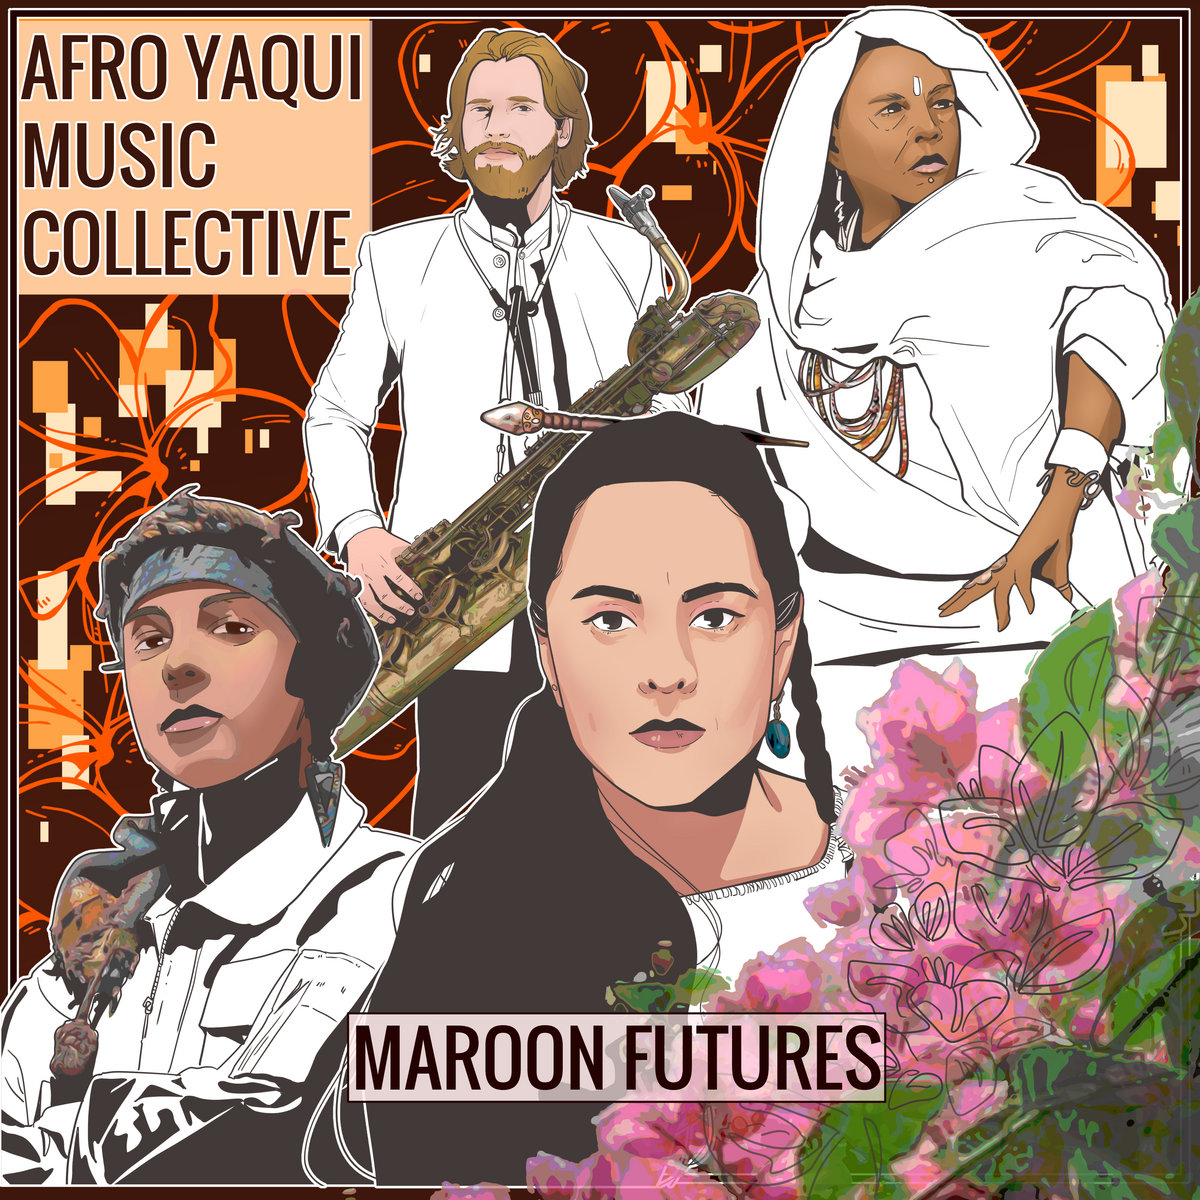 Afro Yaqui Music Collective: Maroon Futures